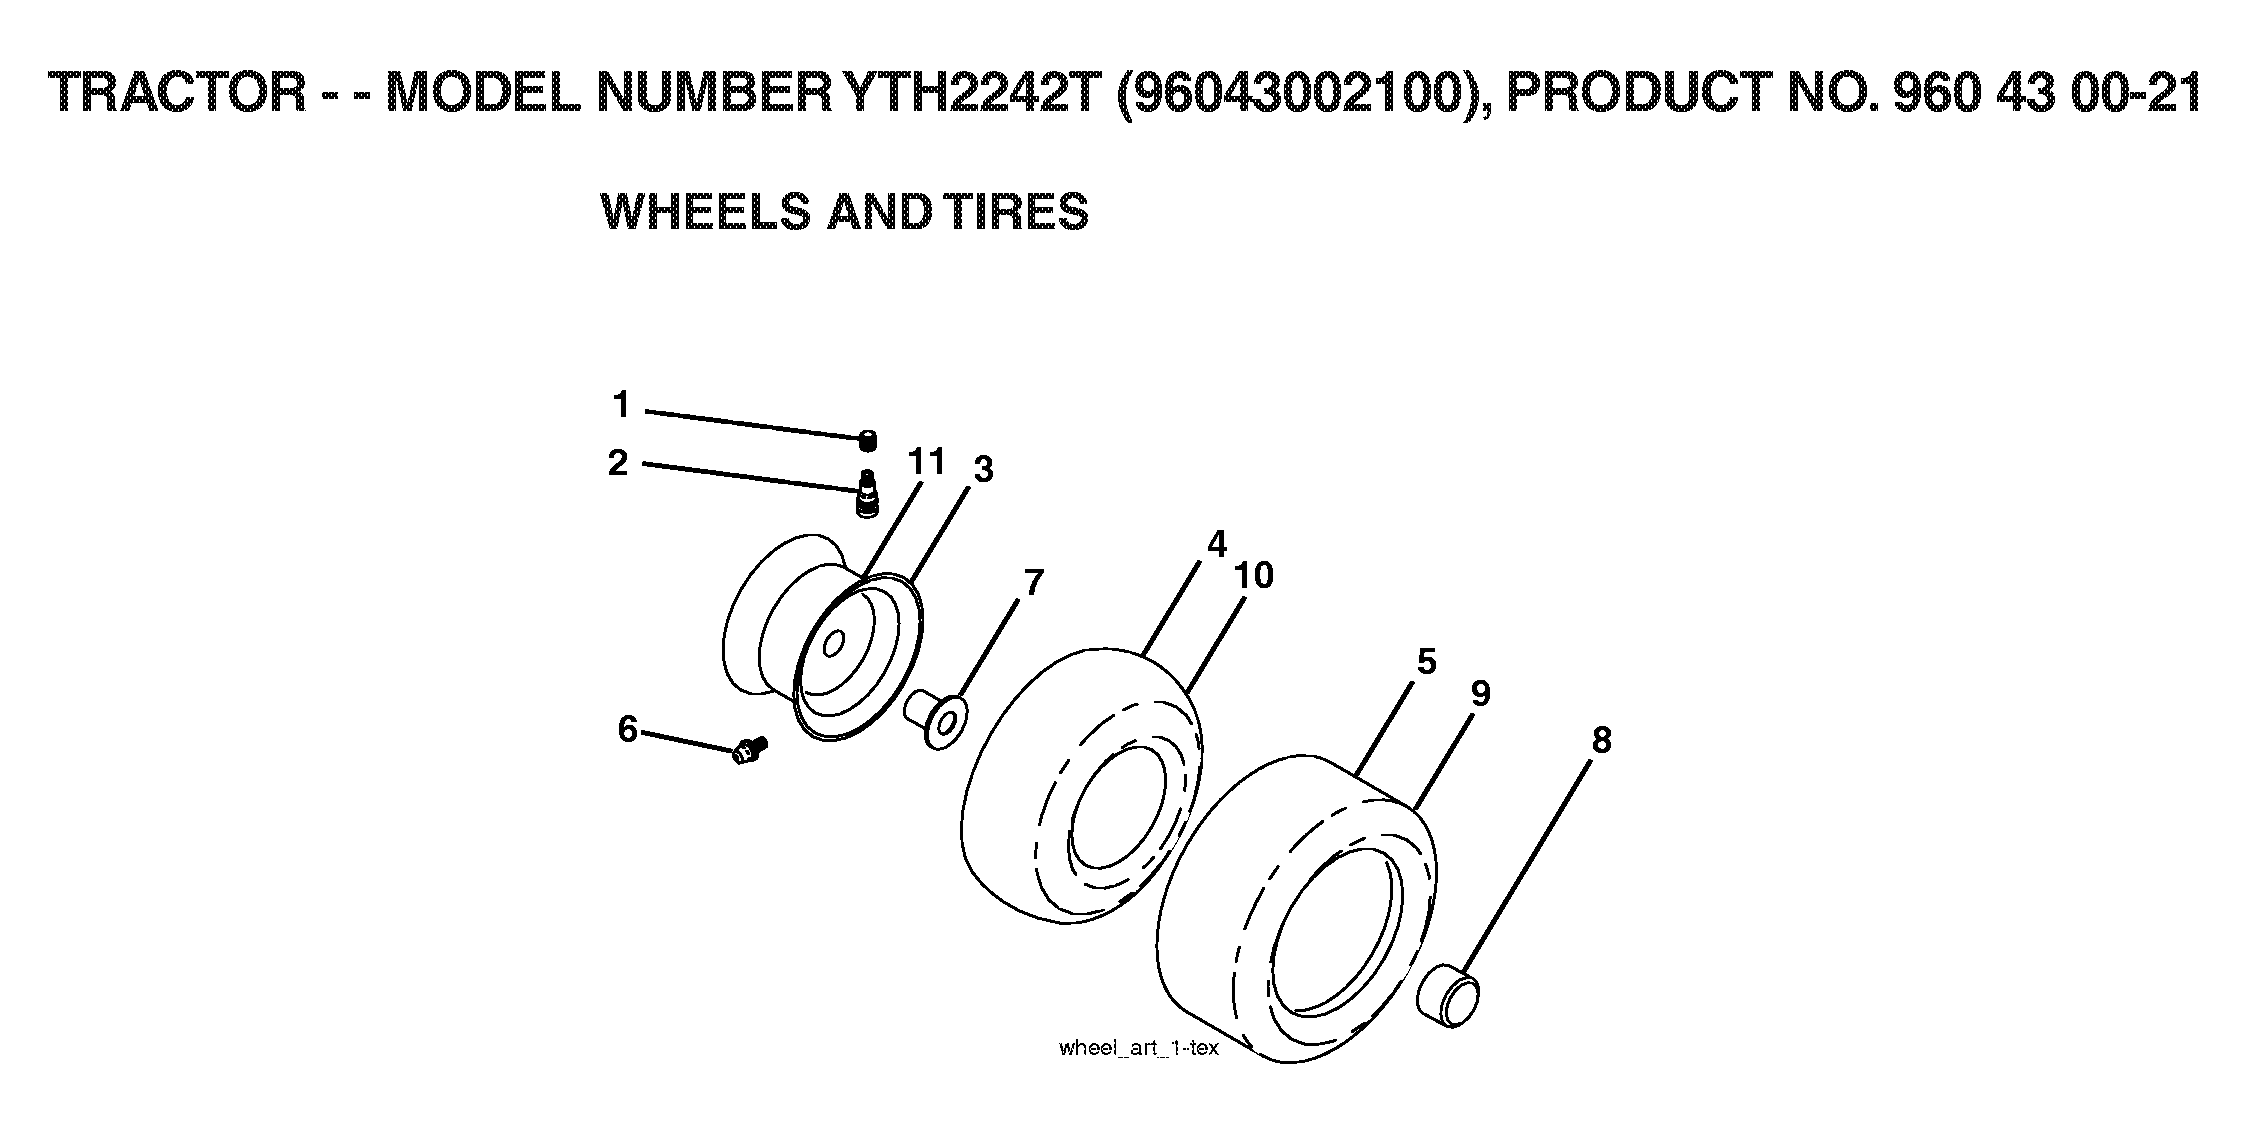 Wheels and tires 532059192, 532065139, 532106732, 532059904, 532122073, 532000278, 532009040, 532104757, 532138468, 532007152, 532106108, 576707201